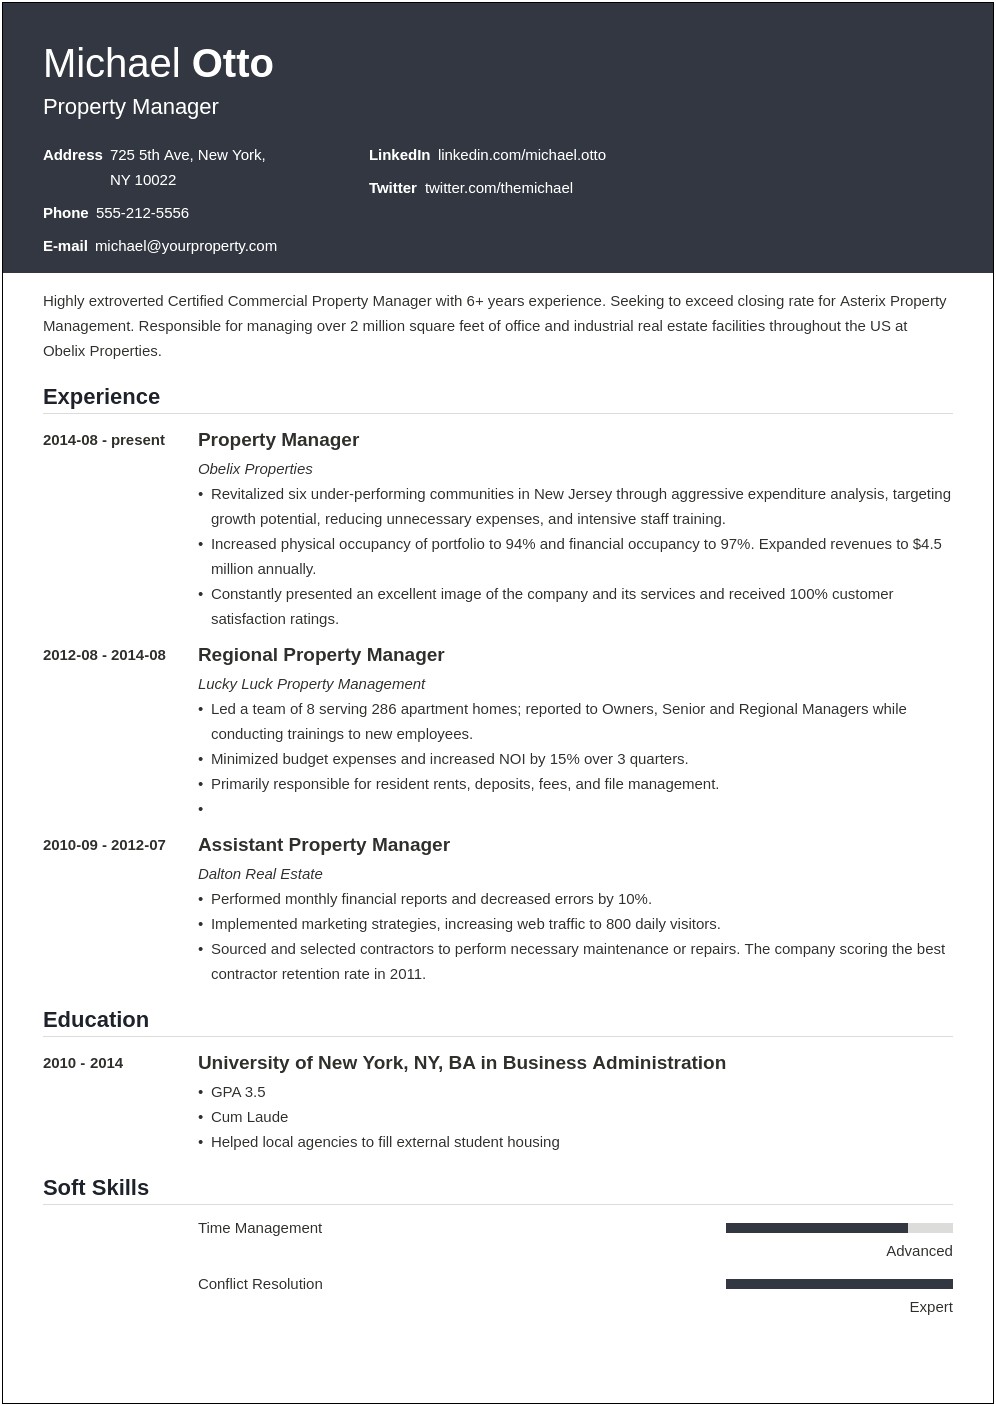 Resume Cover Letter For Assistant Property Manager